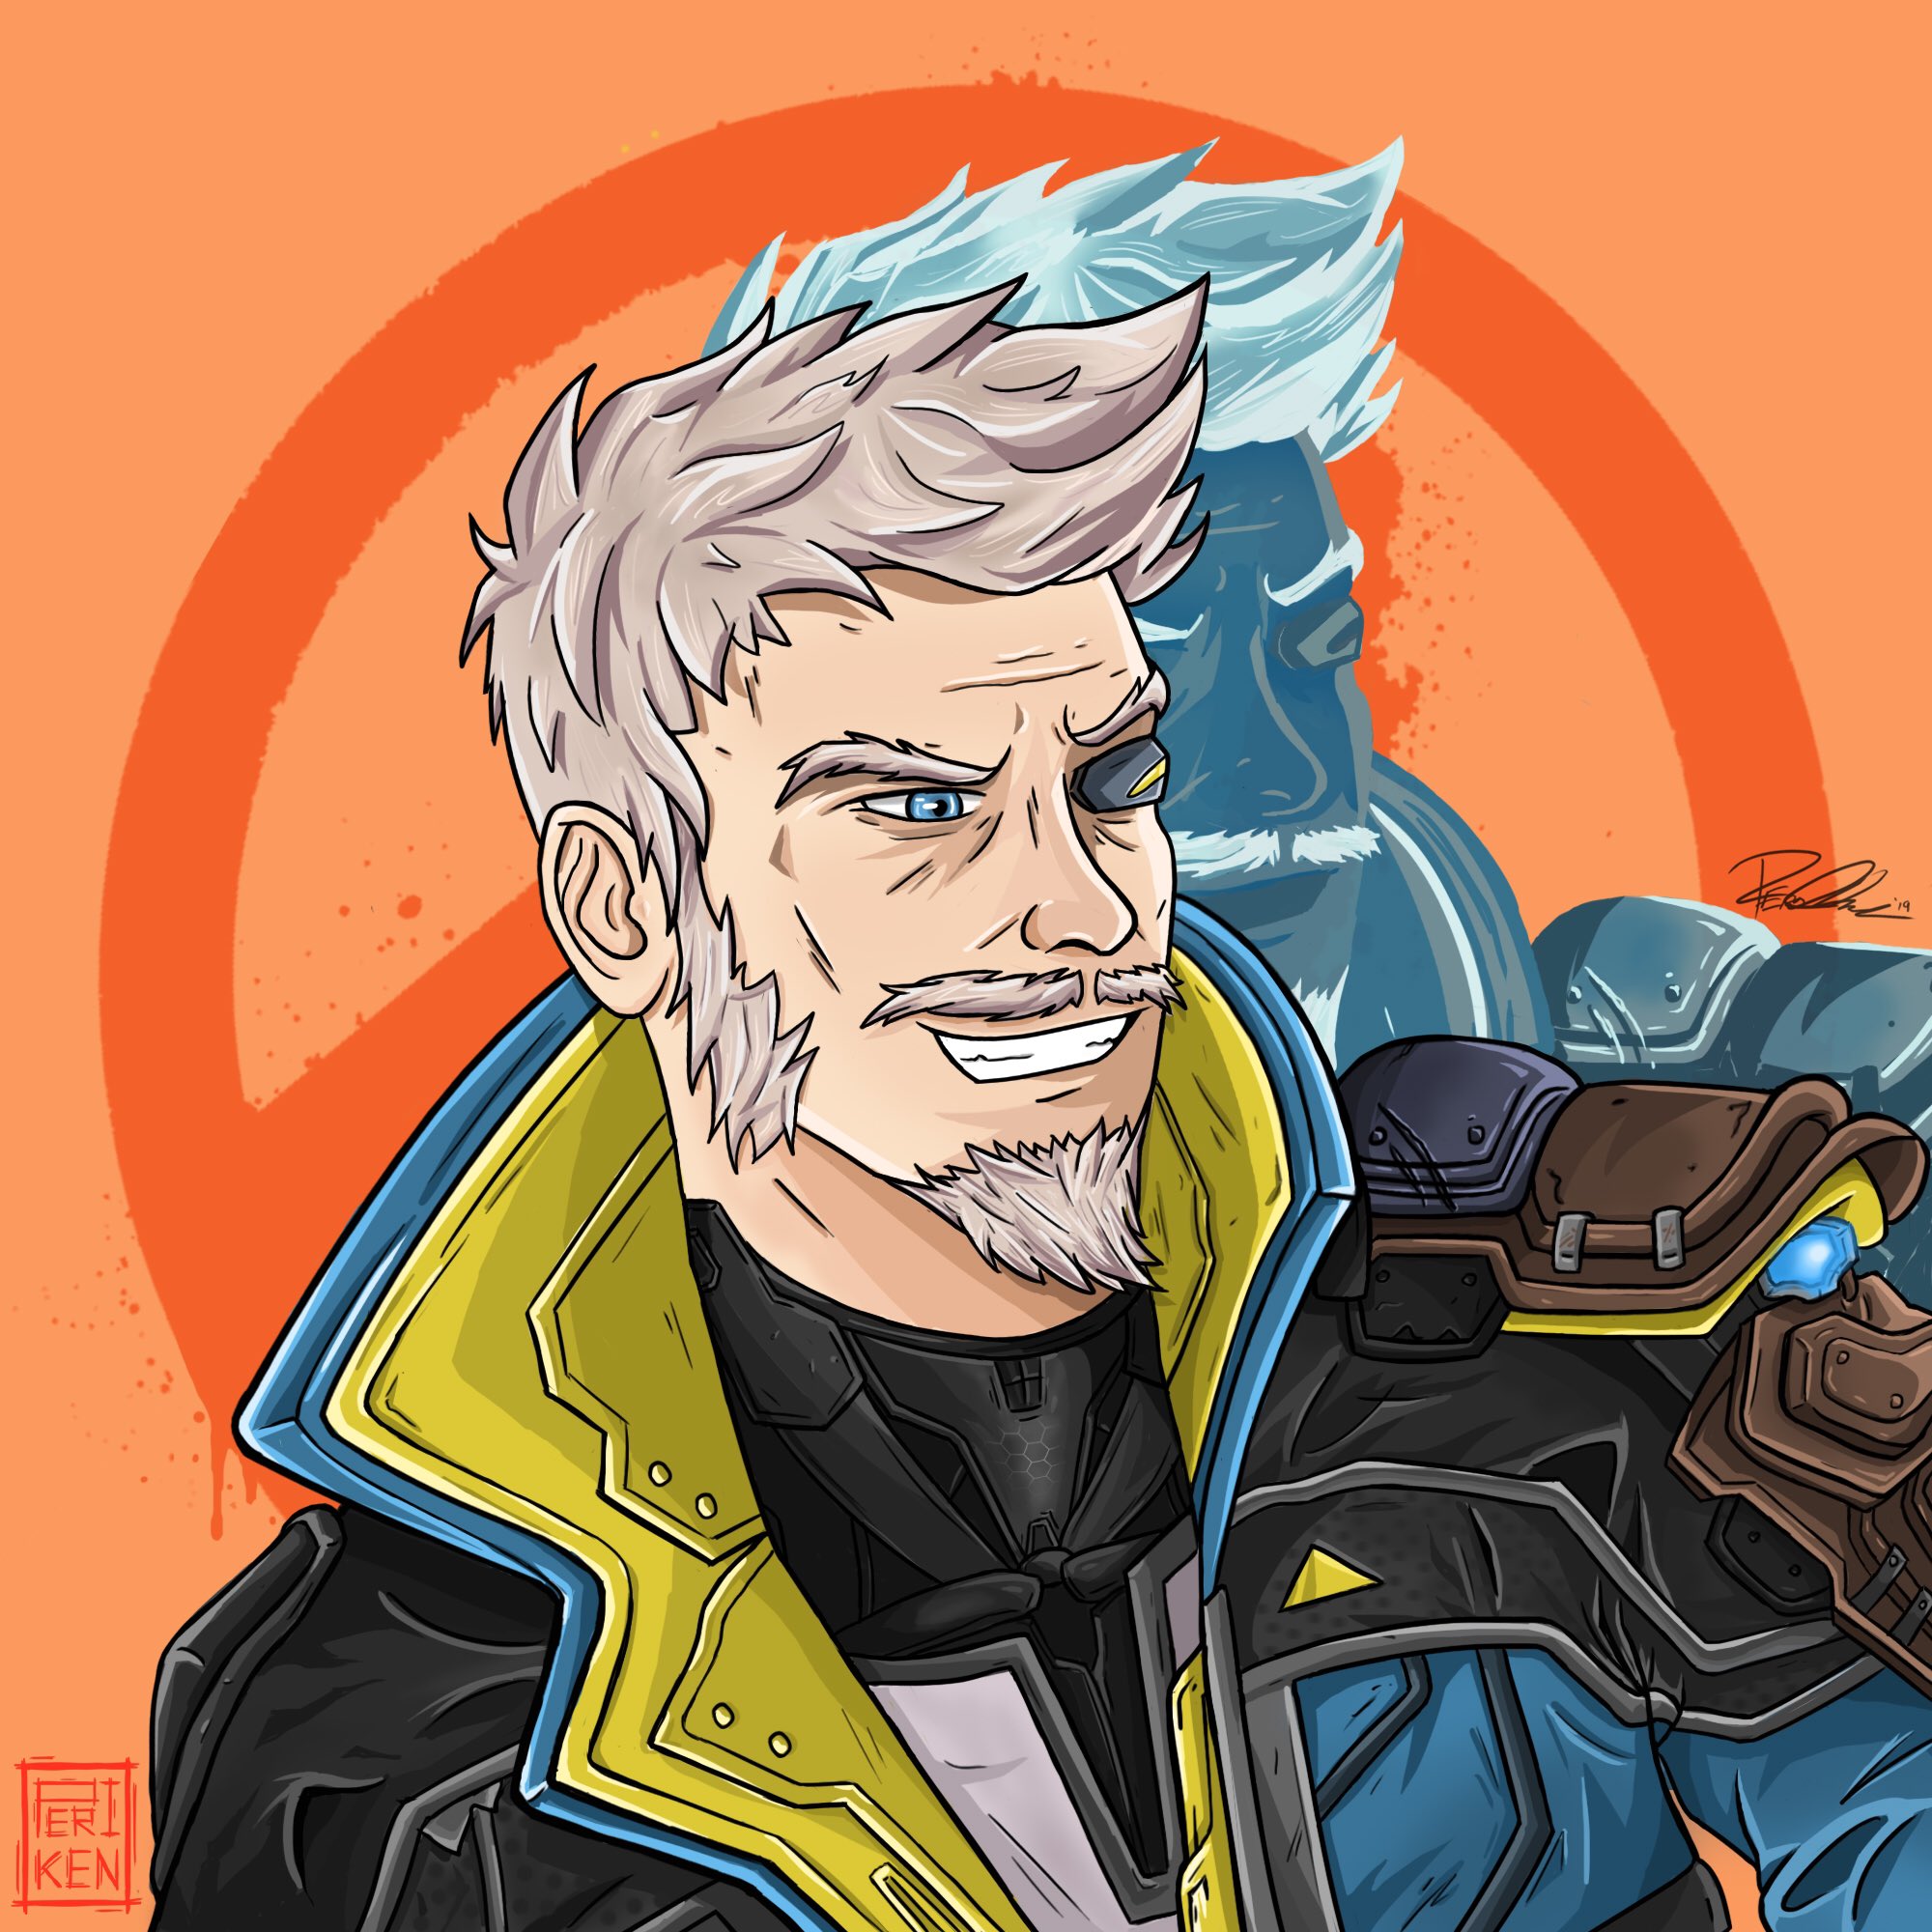 “I had to draw my favourite vault hunter, the devilishly handsome Zane Flyn...